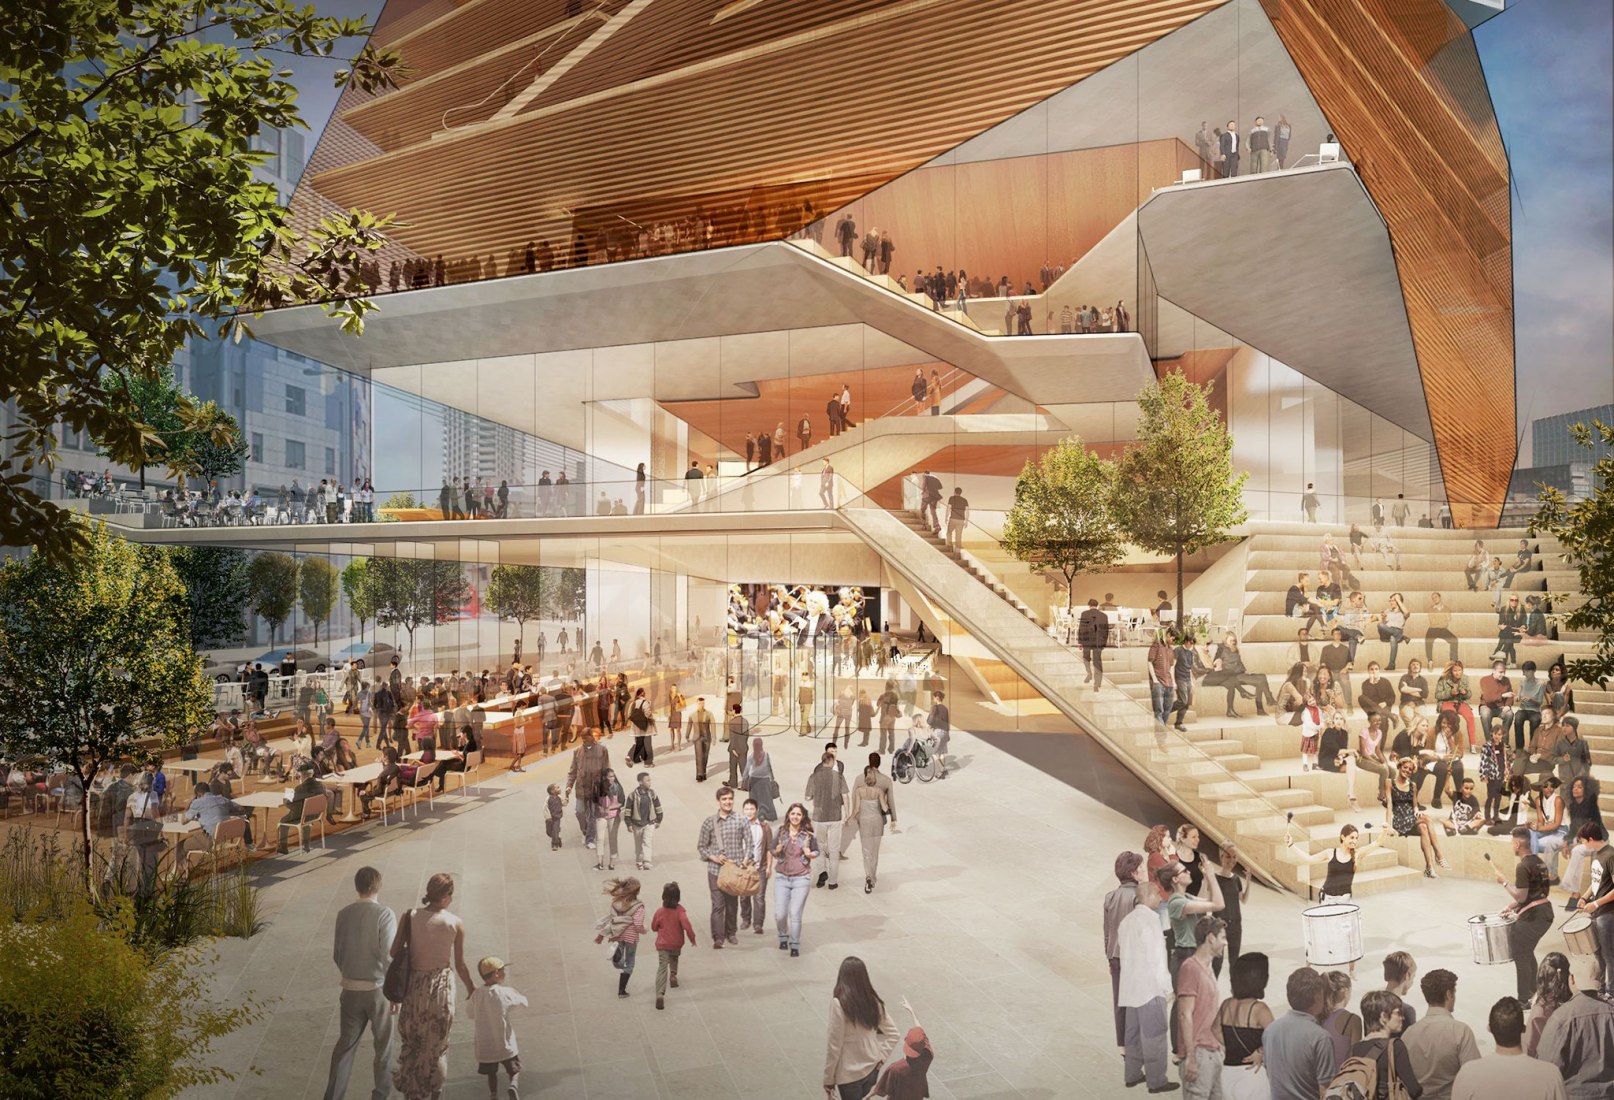 Rendering. Public Realm, Accessibility. Centre for Music Exterior View, by Diller Scofidio + Renfro design studio